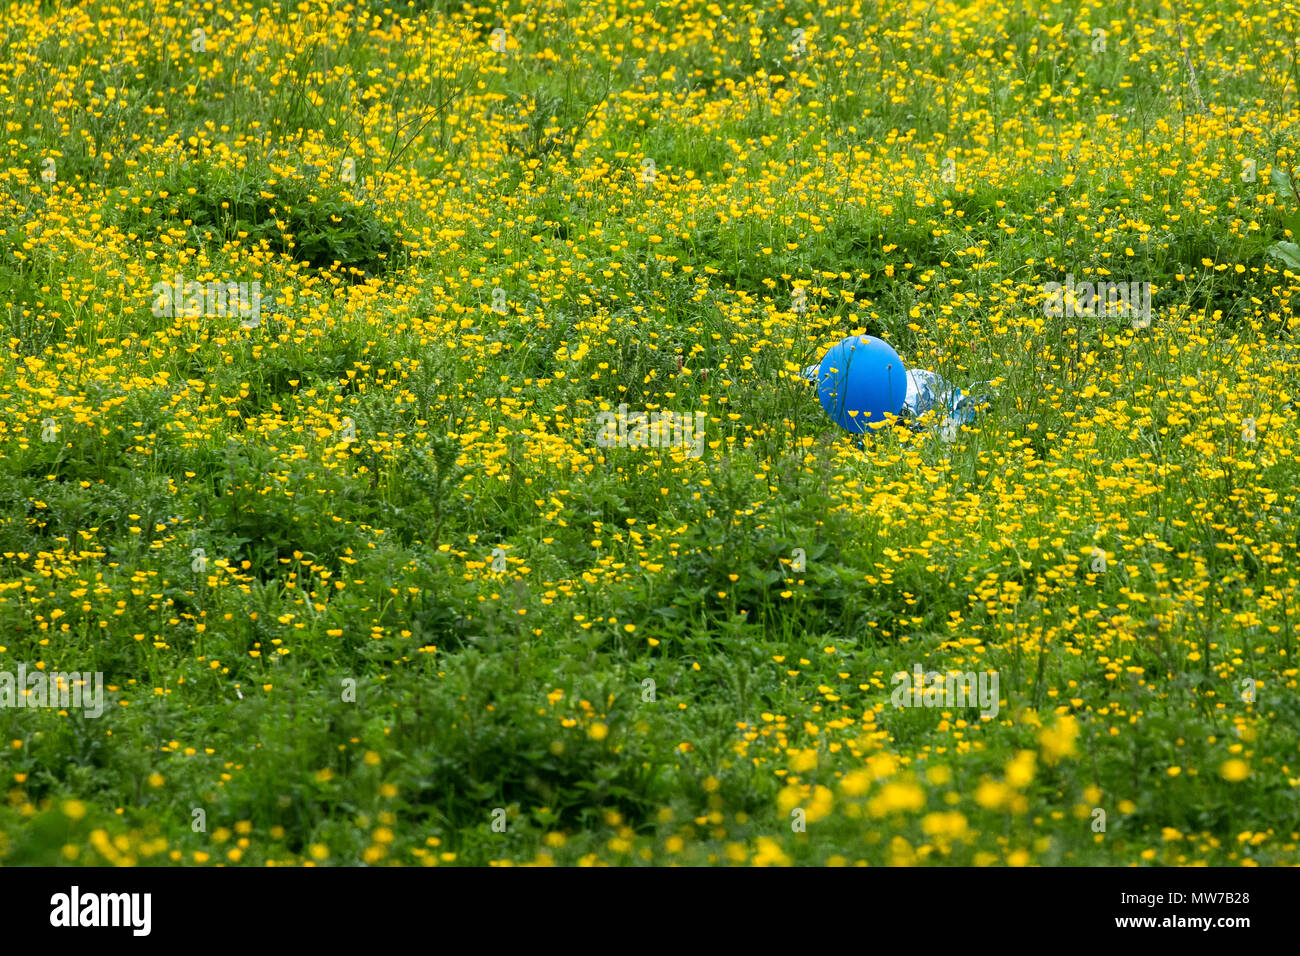 Balloon litter. A balloon has landed in a field. Released balloons can have a destructive effects  on animals, people, and the environment. Stock Photo